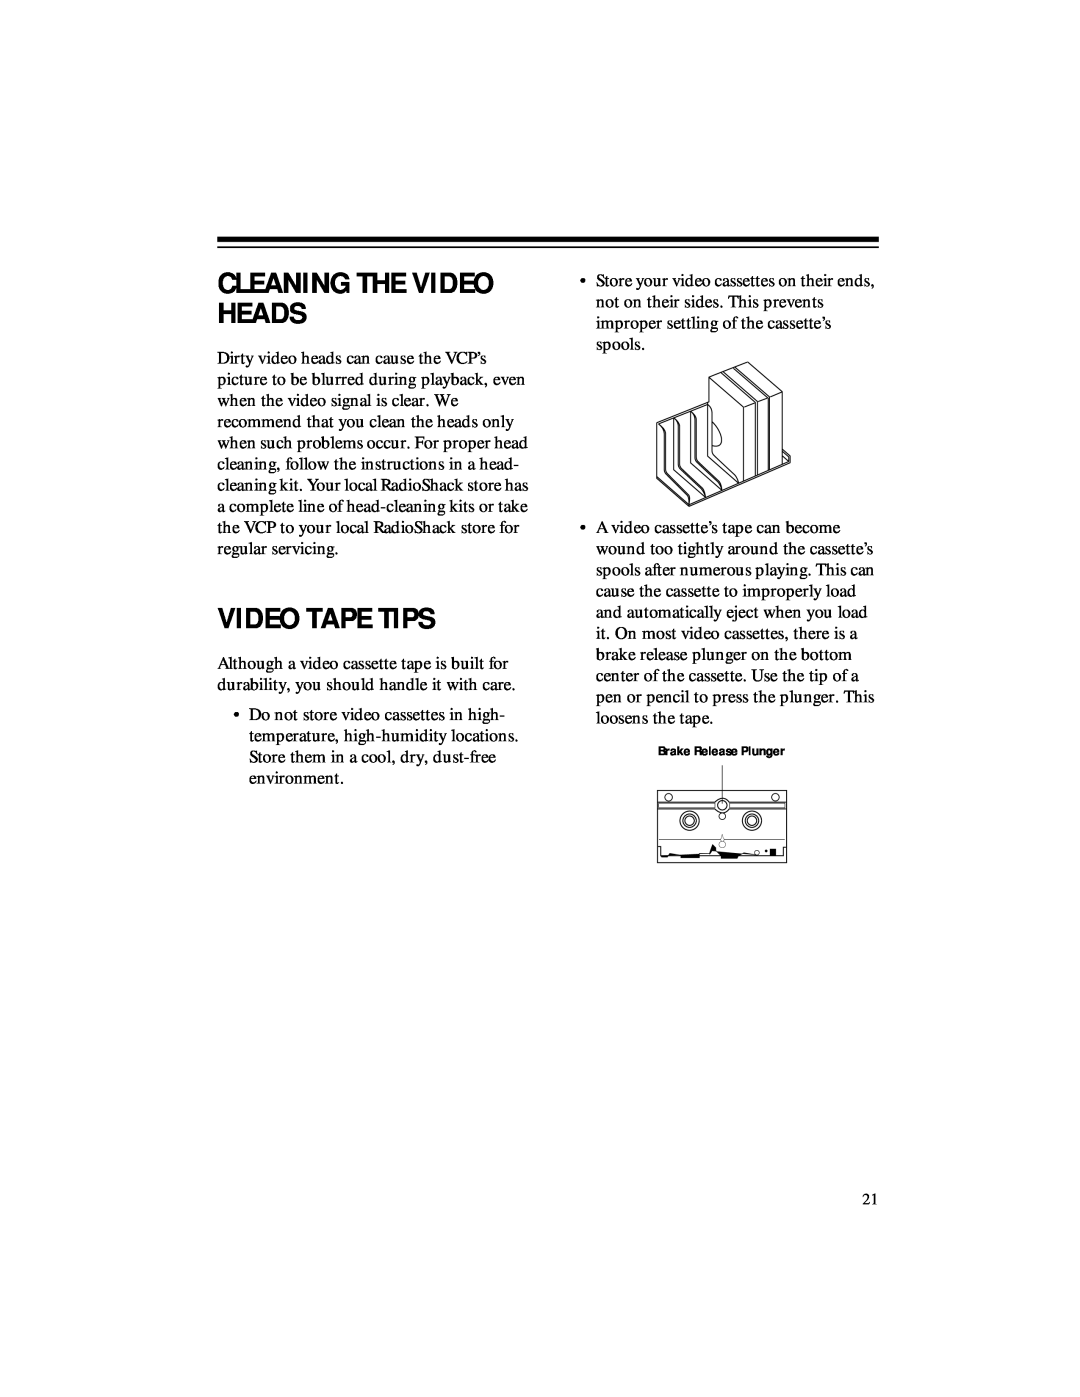 RCA 40, 50 owner manual Cleaning The Video Heads, Video Tape Tips 